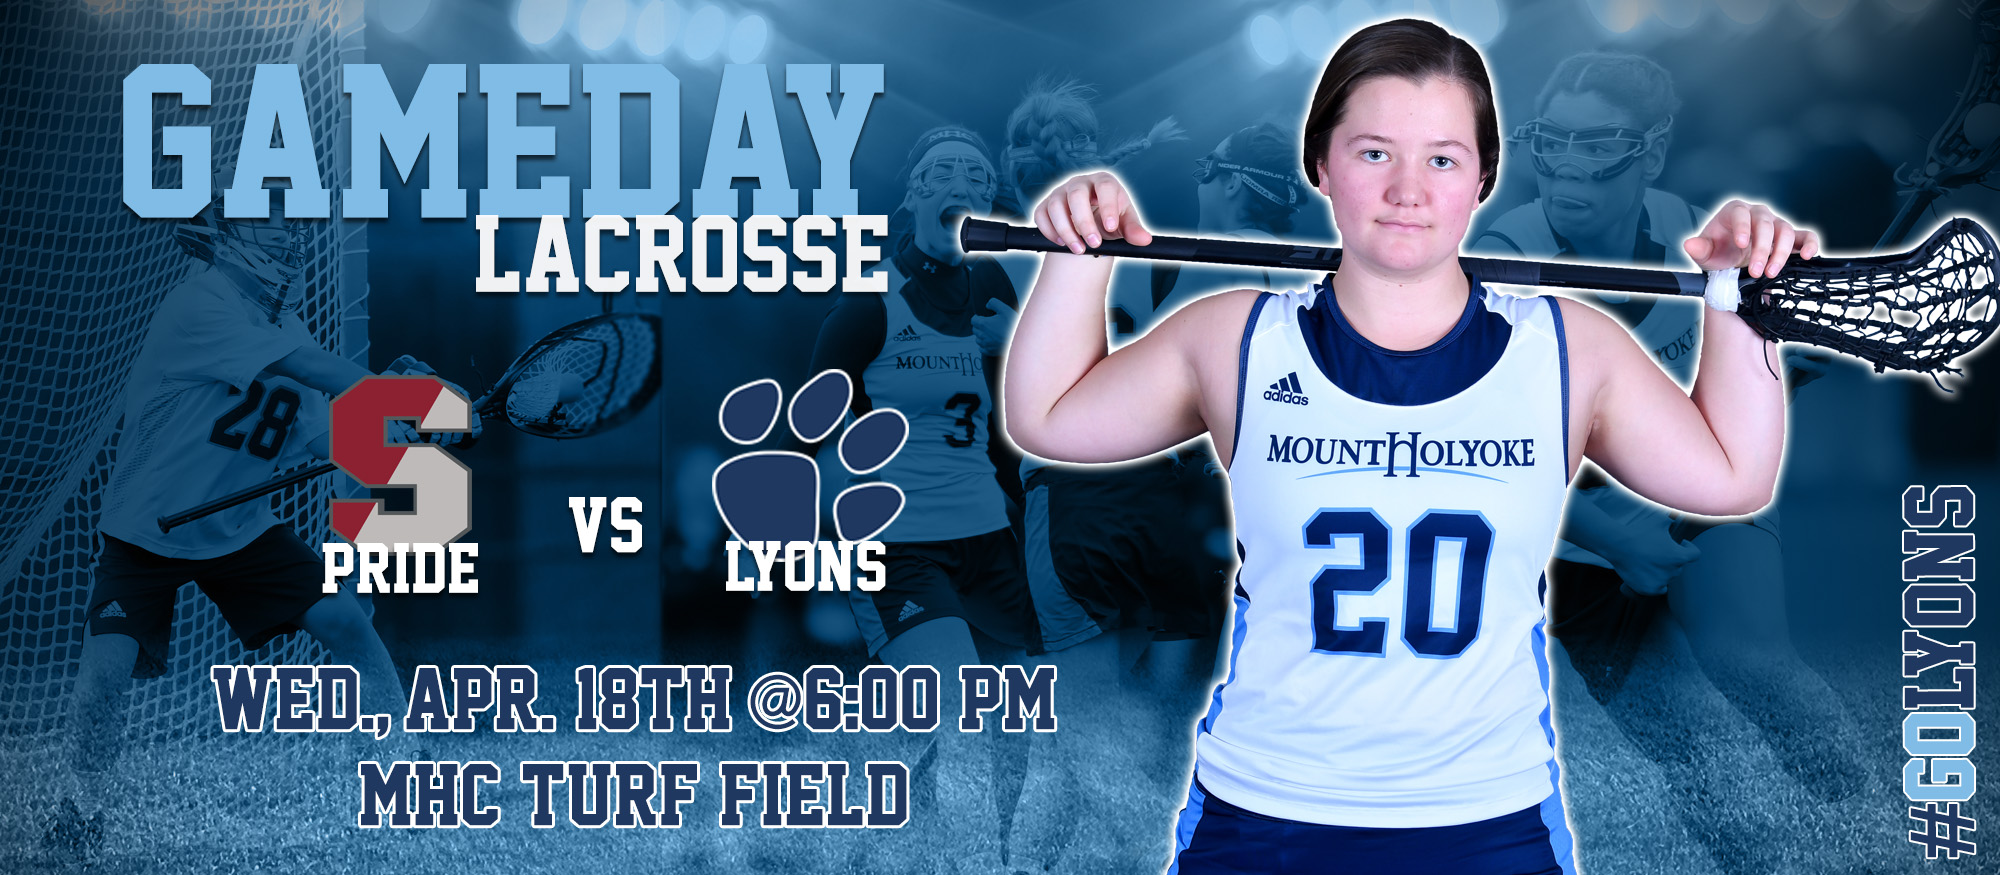 Graphic promoting the Lyons lacrosse team's game against Springfield on April 18, 2018. Featured is first year lacrosse player, Julia Klein.